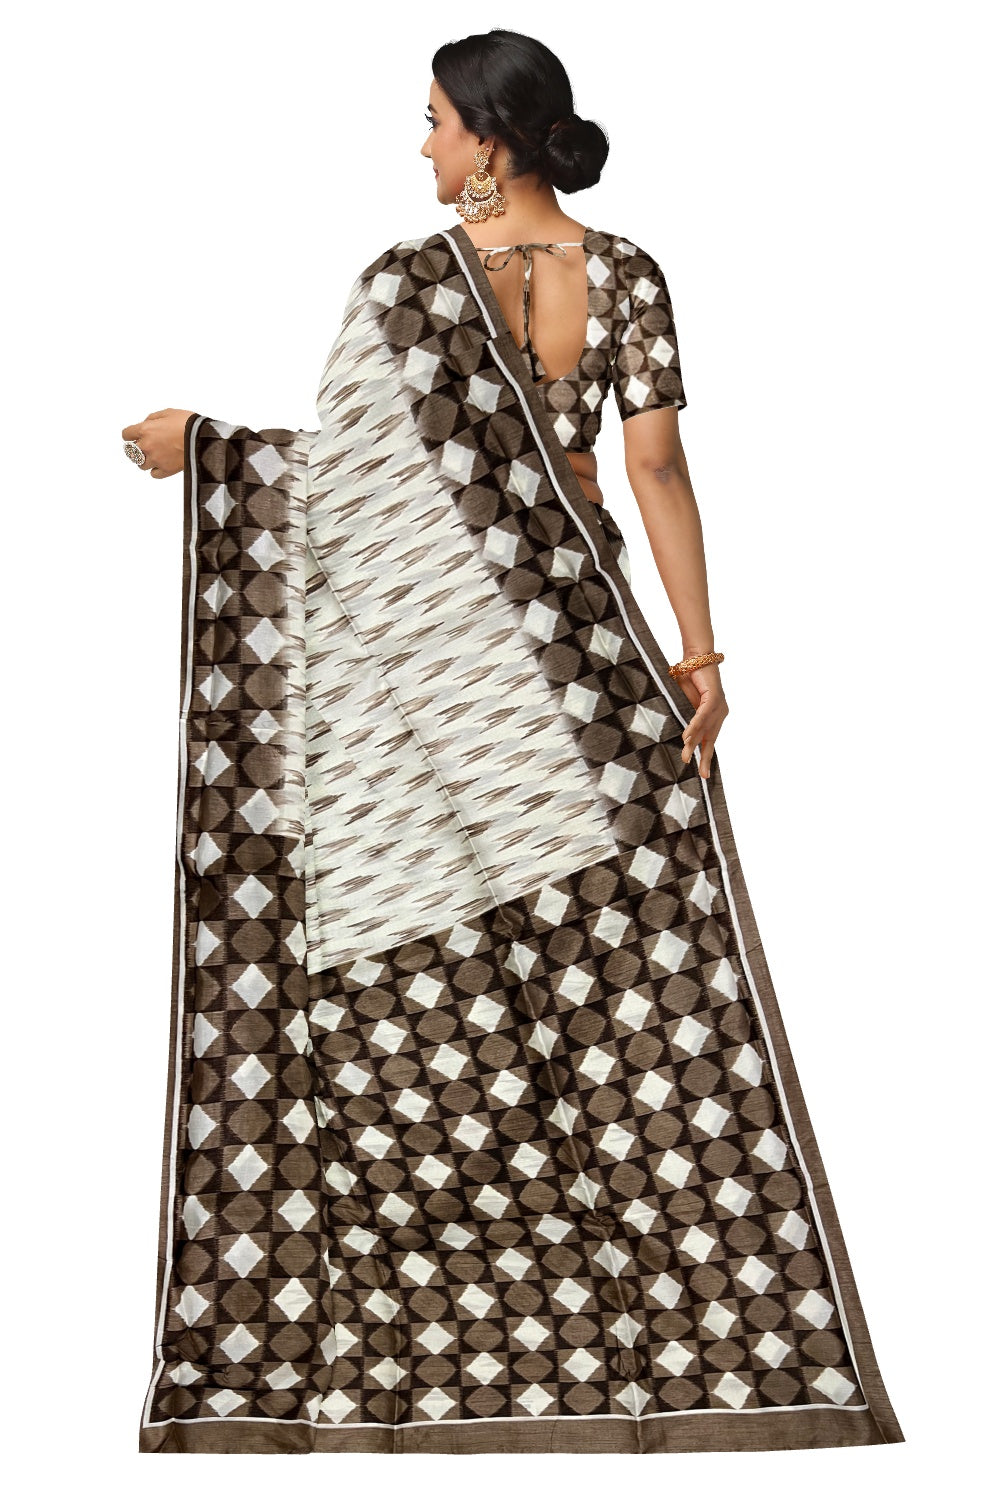 Southloom White and Brown Semi Tussar Designer Saree with Tassels